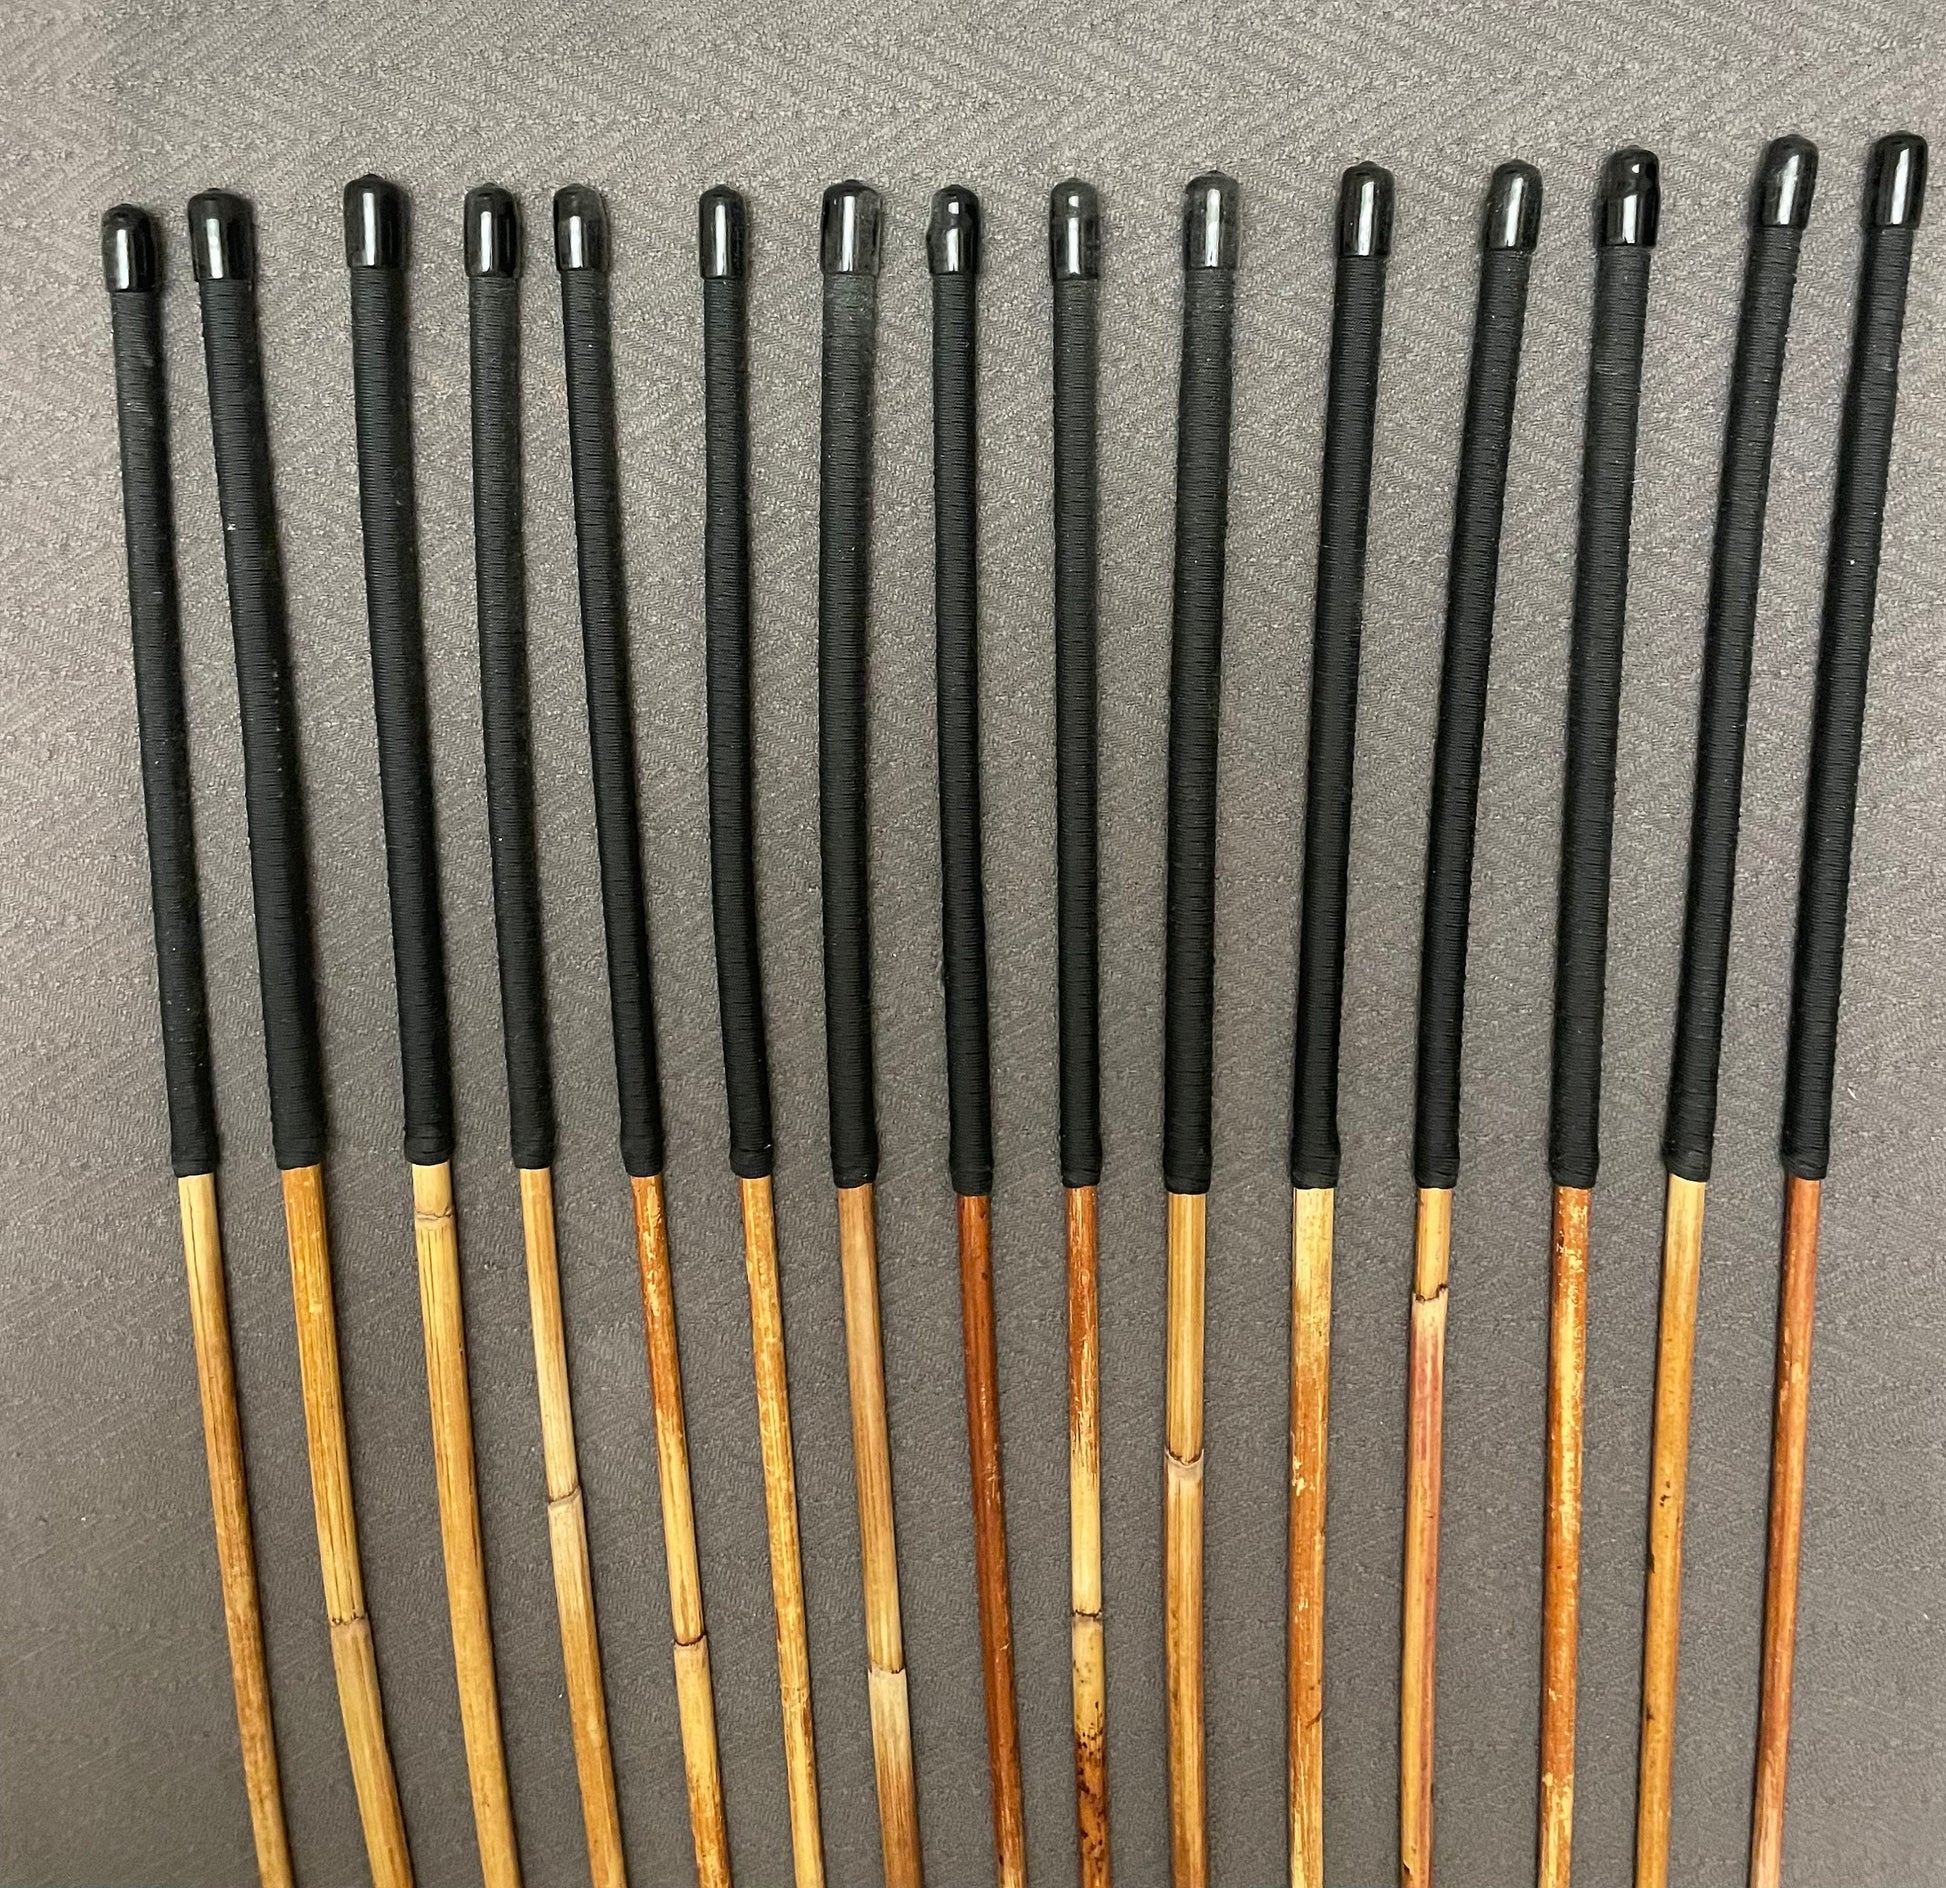 Set of 15 Classic Dragon Rattan Punishment Canes with Black Paracord Handles - 95 to 100 cms Length - Sales Special